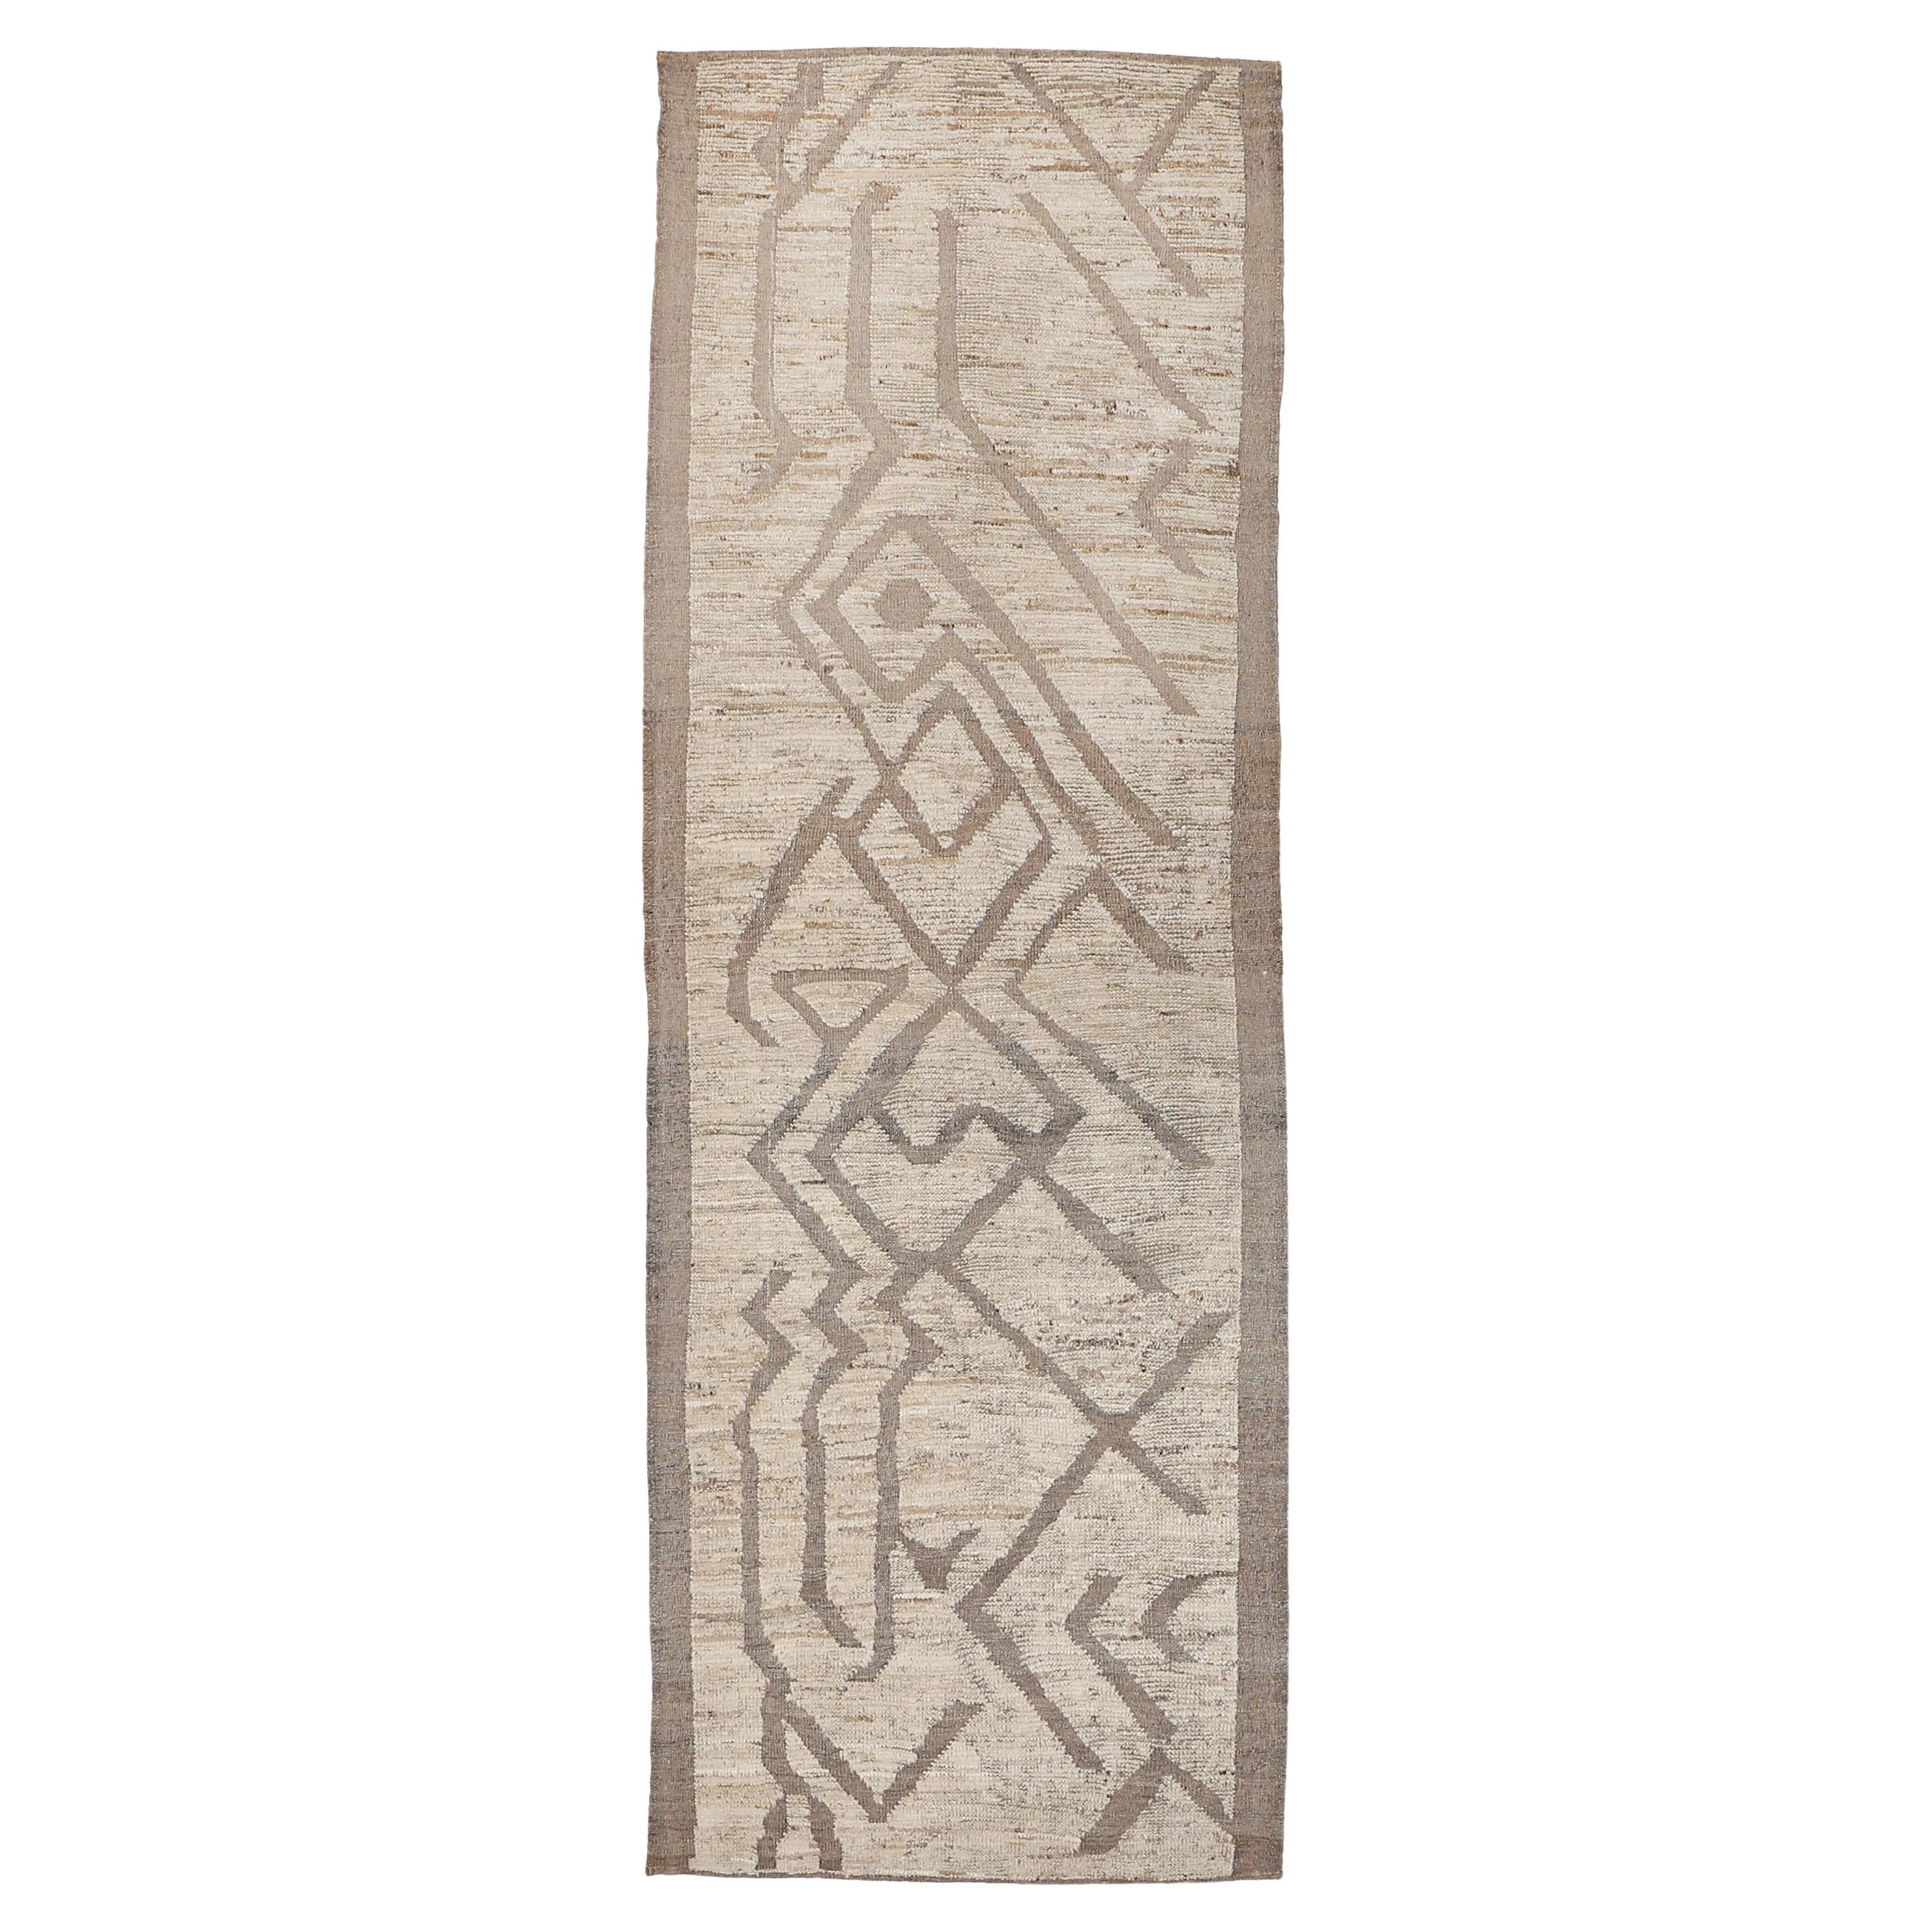 Modernist Textured Moroccan Style Kuba Runner Rug by Alberto Levi Gallery For Sale